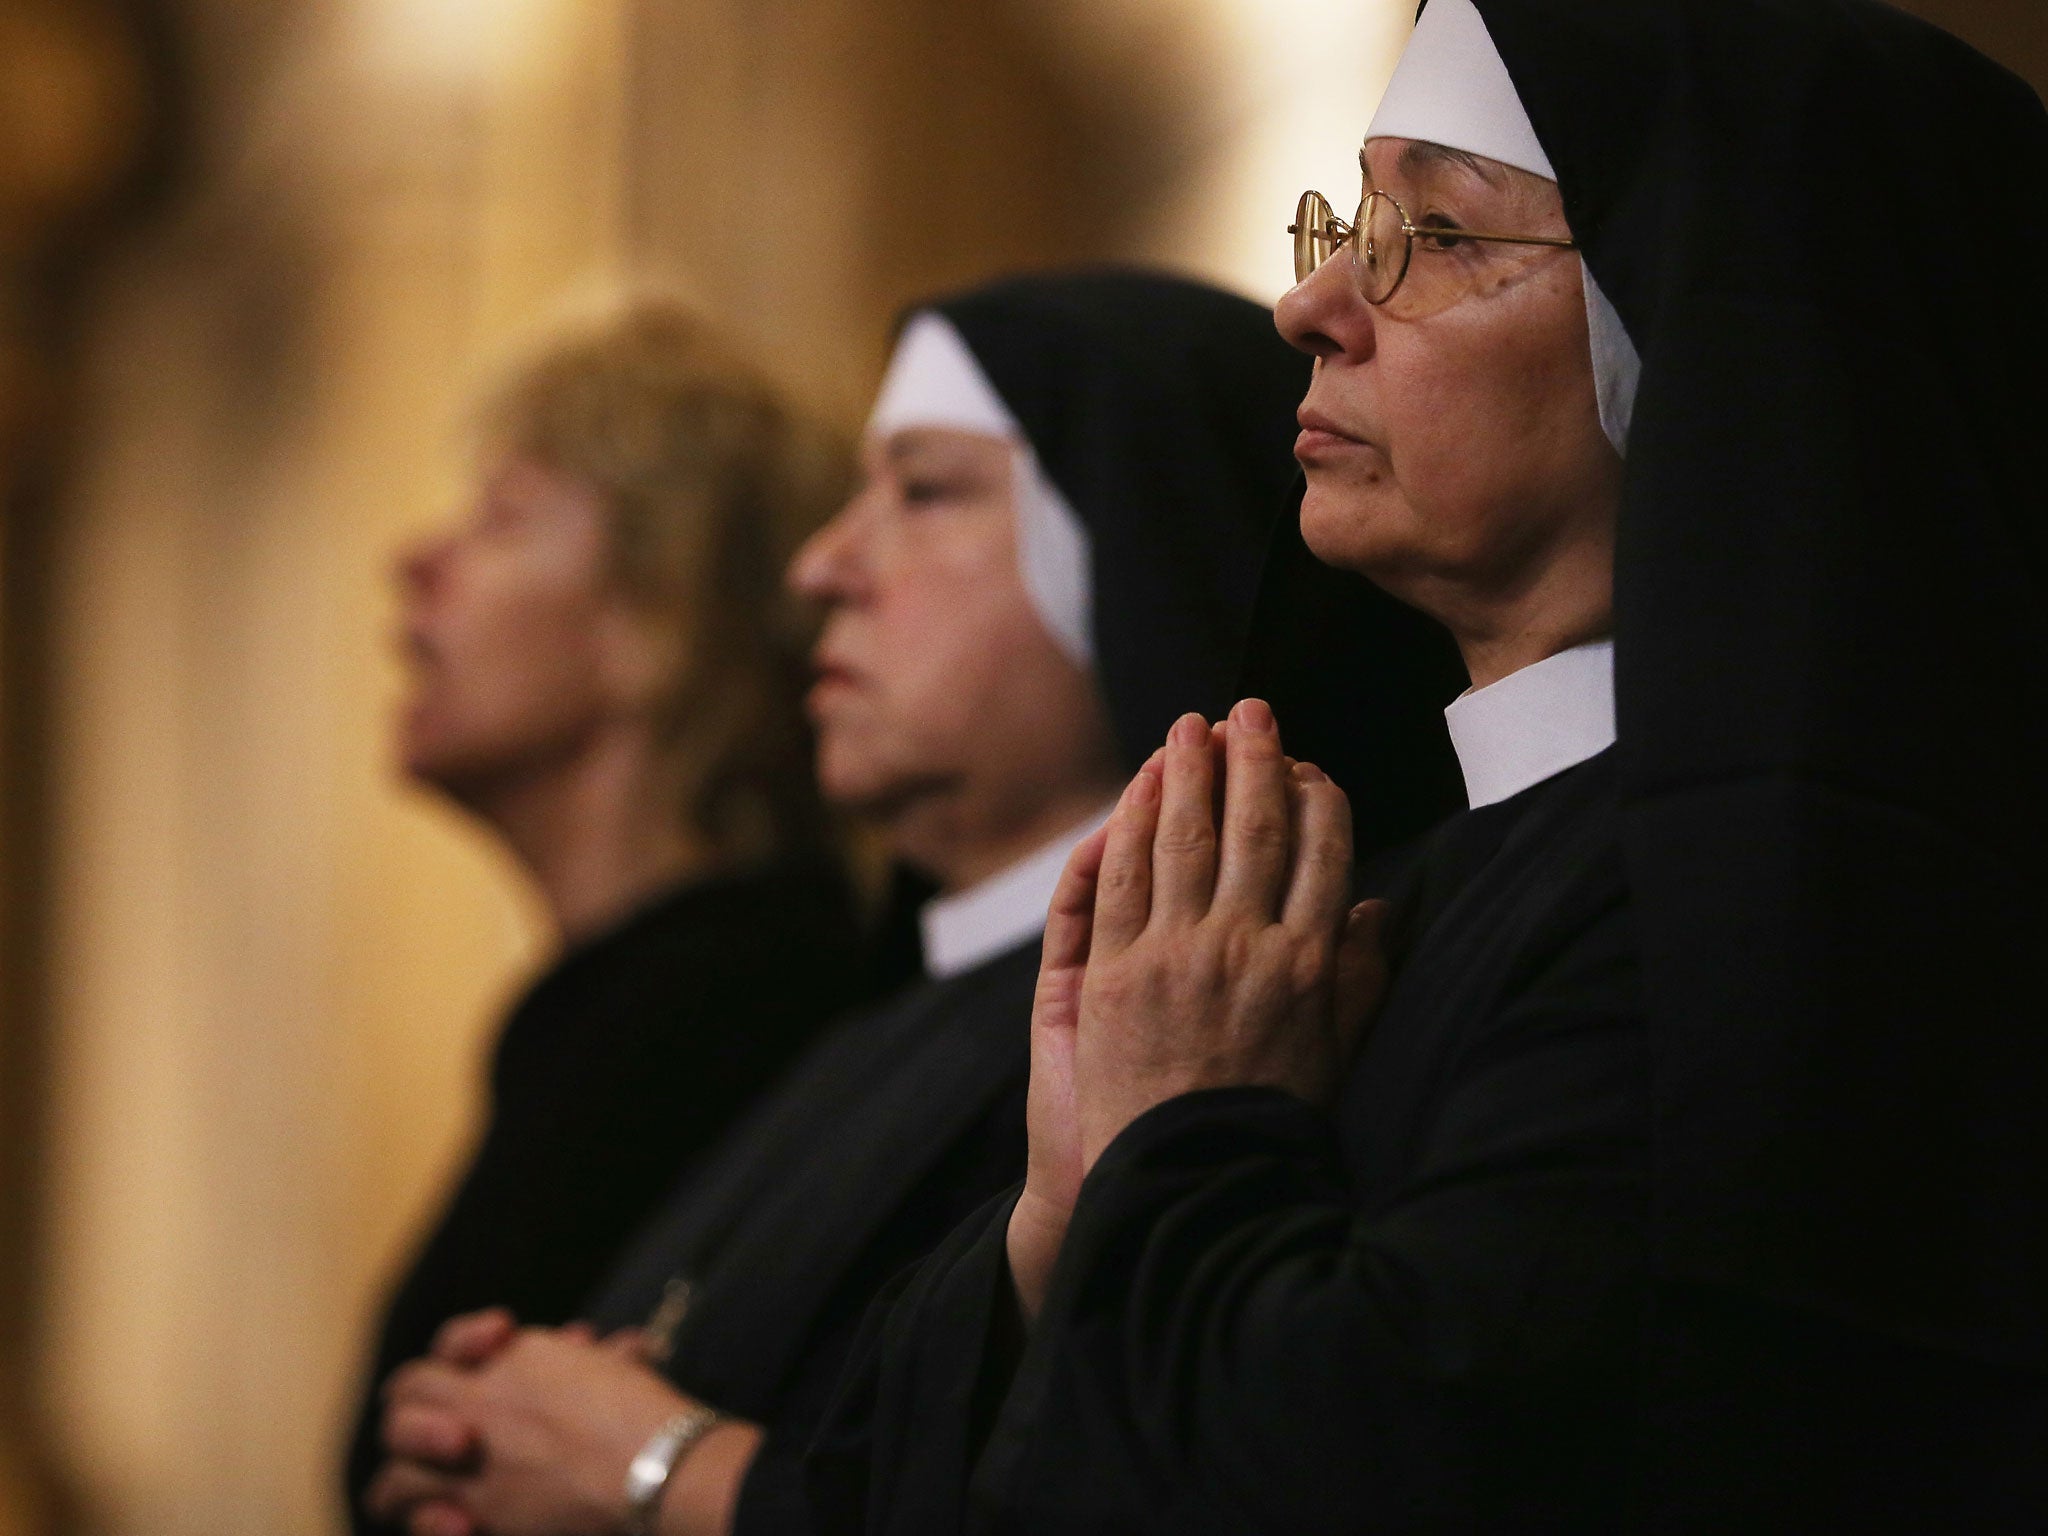 Nuns worship in the Metropolitan Cathedral during Mass on the day after Pope Francis was elected at the conclave on 14 March 2013